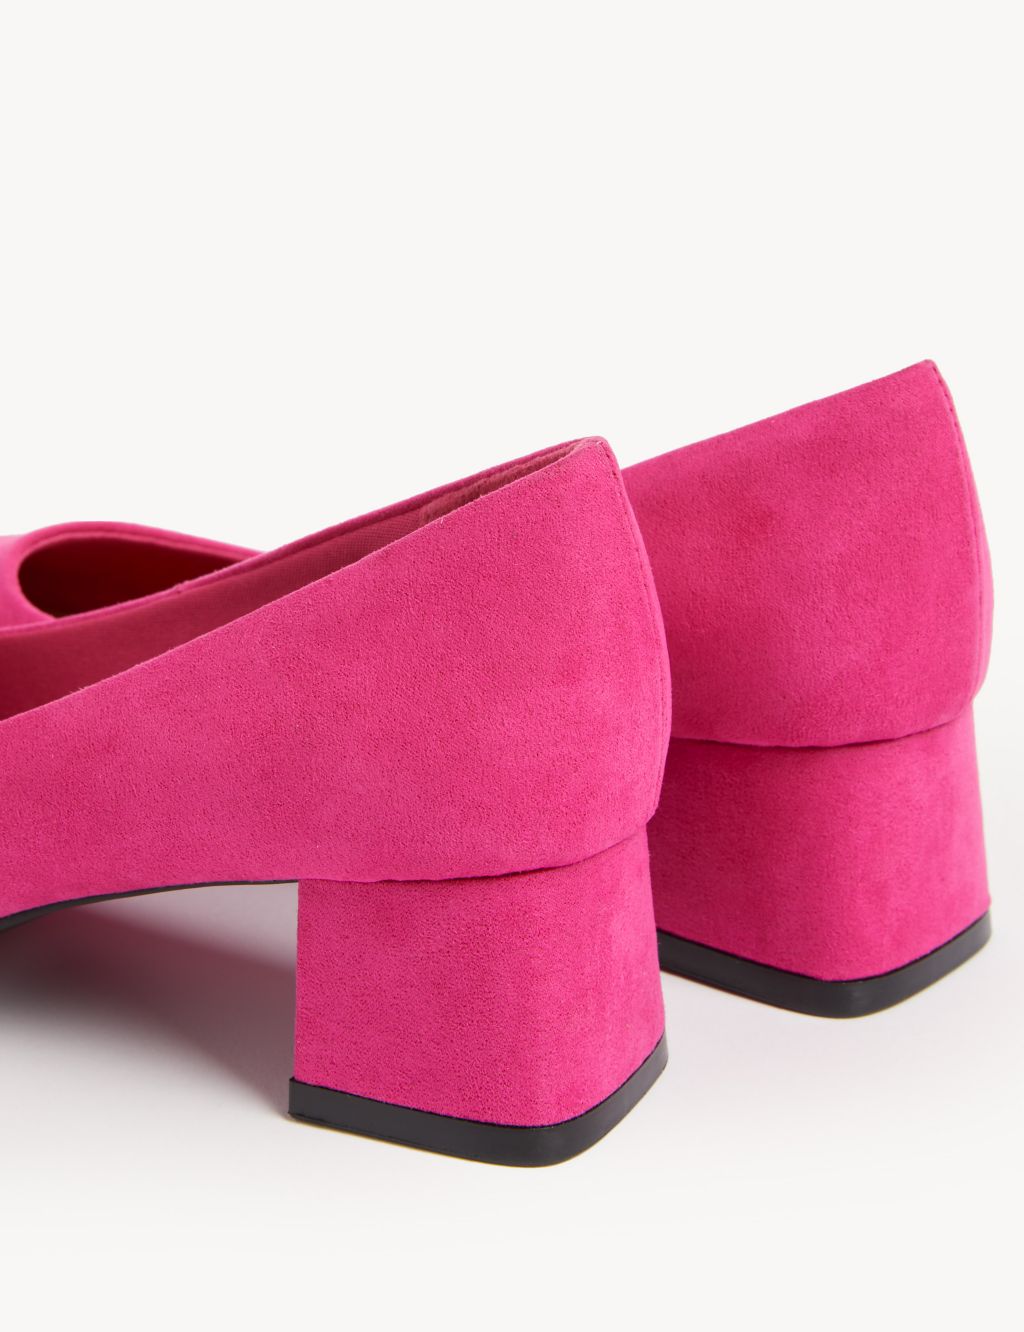 Wide Fit Block Heel Square Toe Shoes image 2